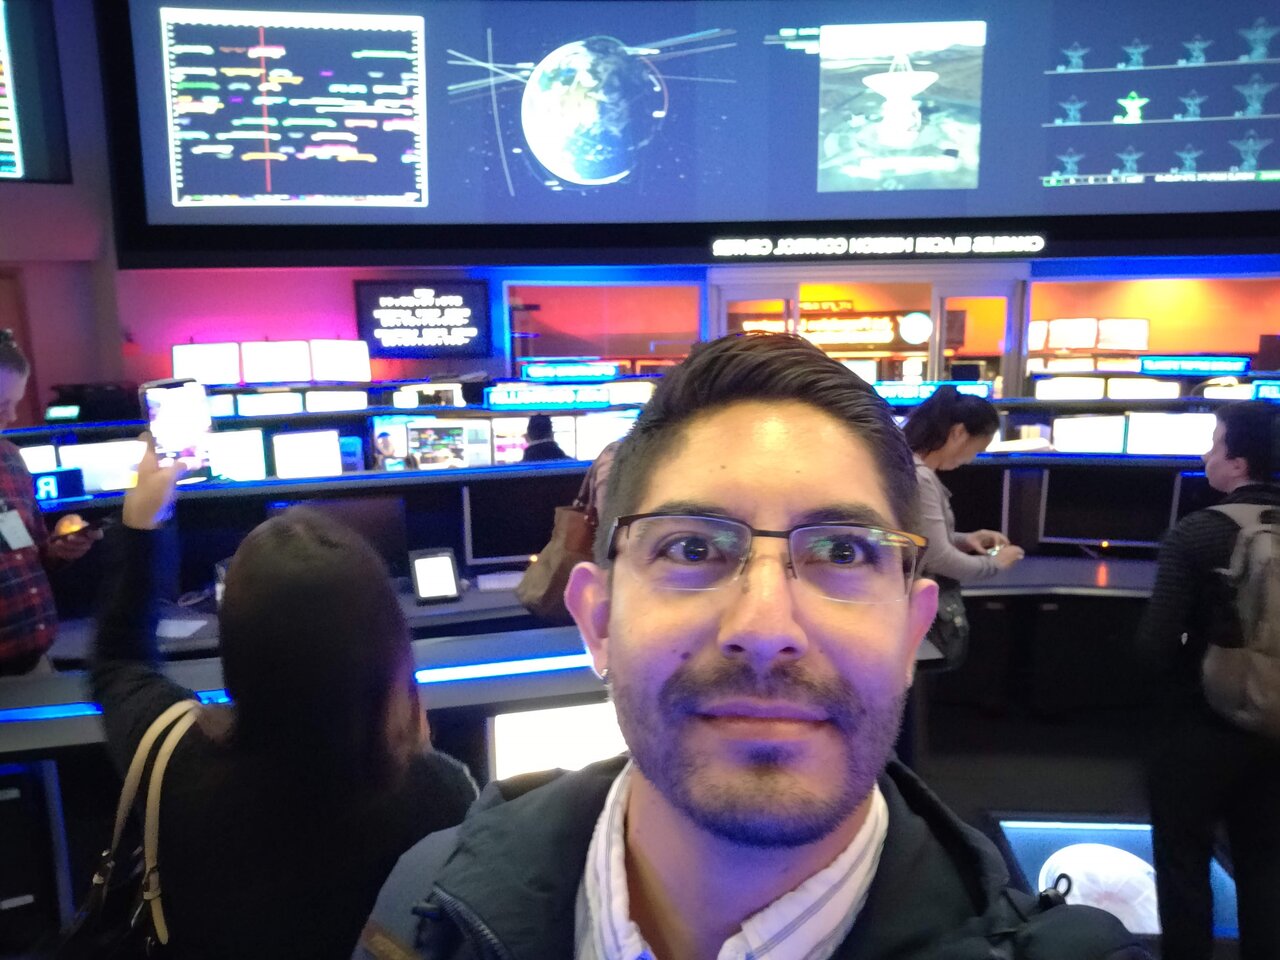 Talib Oliver Cabrera is standing in a large room at JPL full of screens on the wall, and with lots of rows of computers. It looks like a mission control room. 